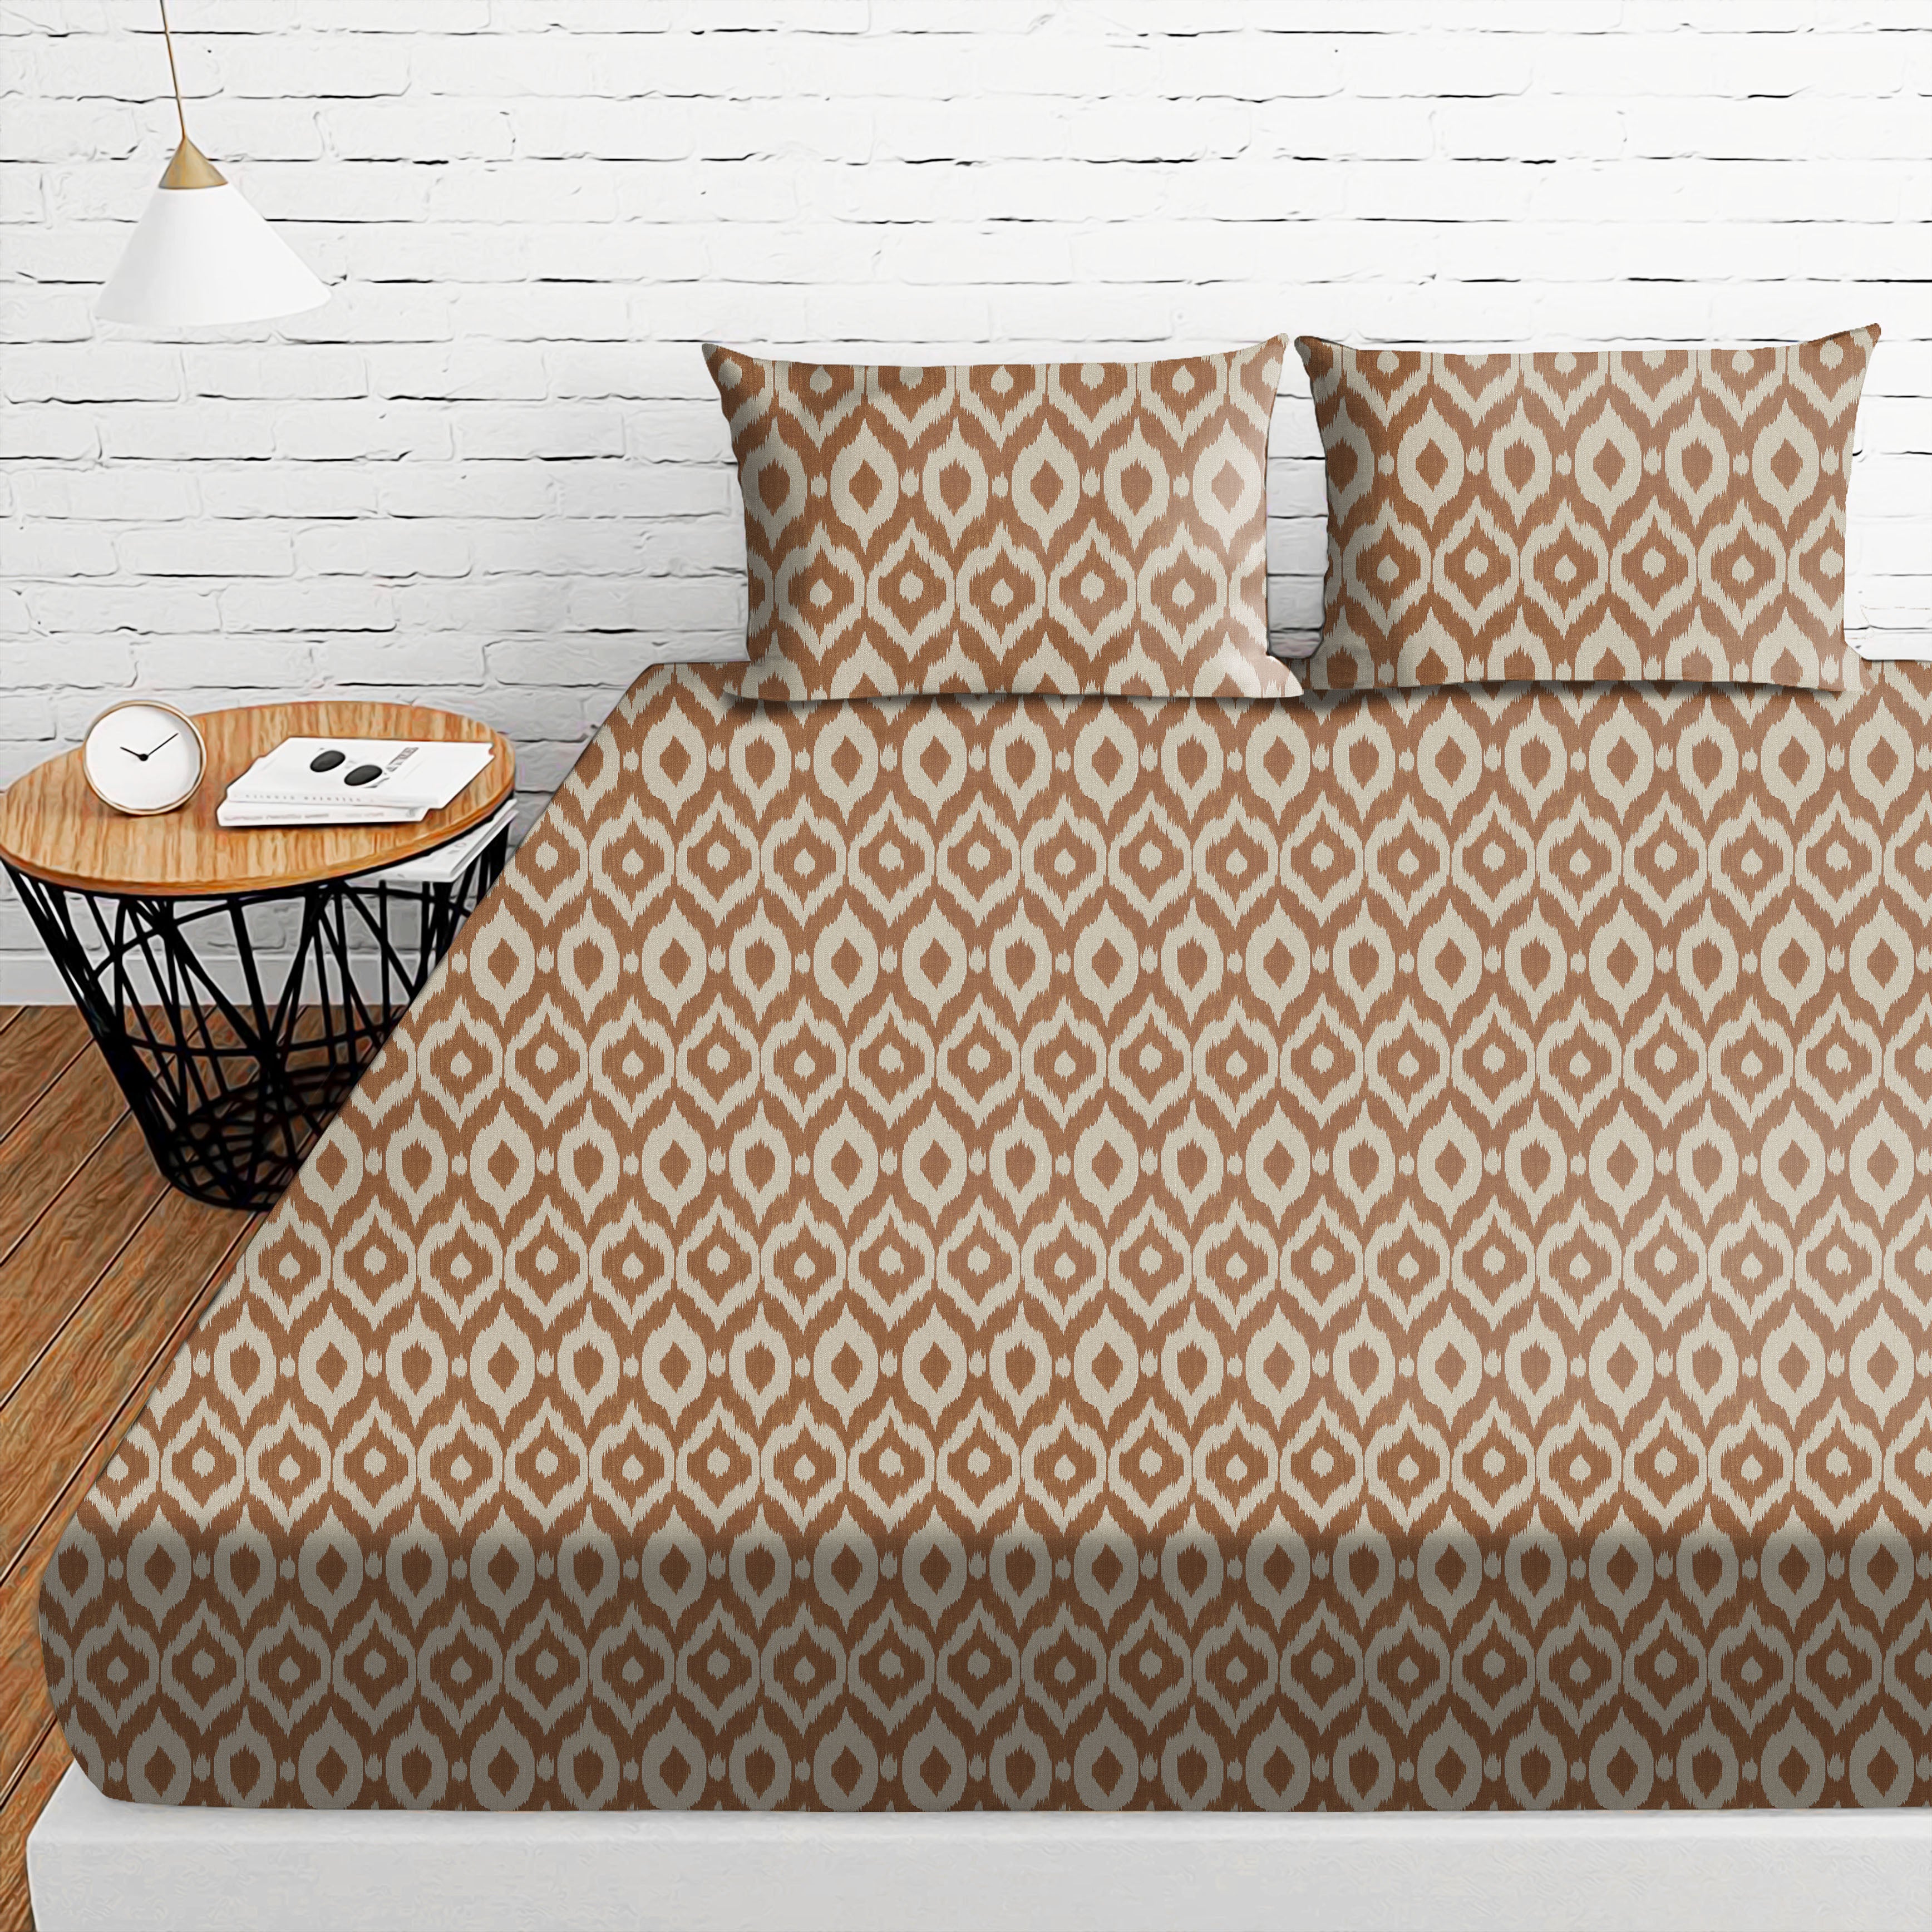 Bedcover Bistre Dark Beige for Double Bed with 2 Pillow Covers King Size (104" X 90")